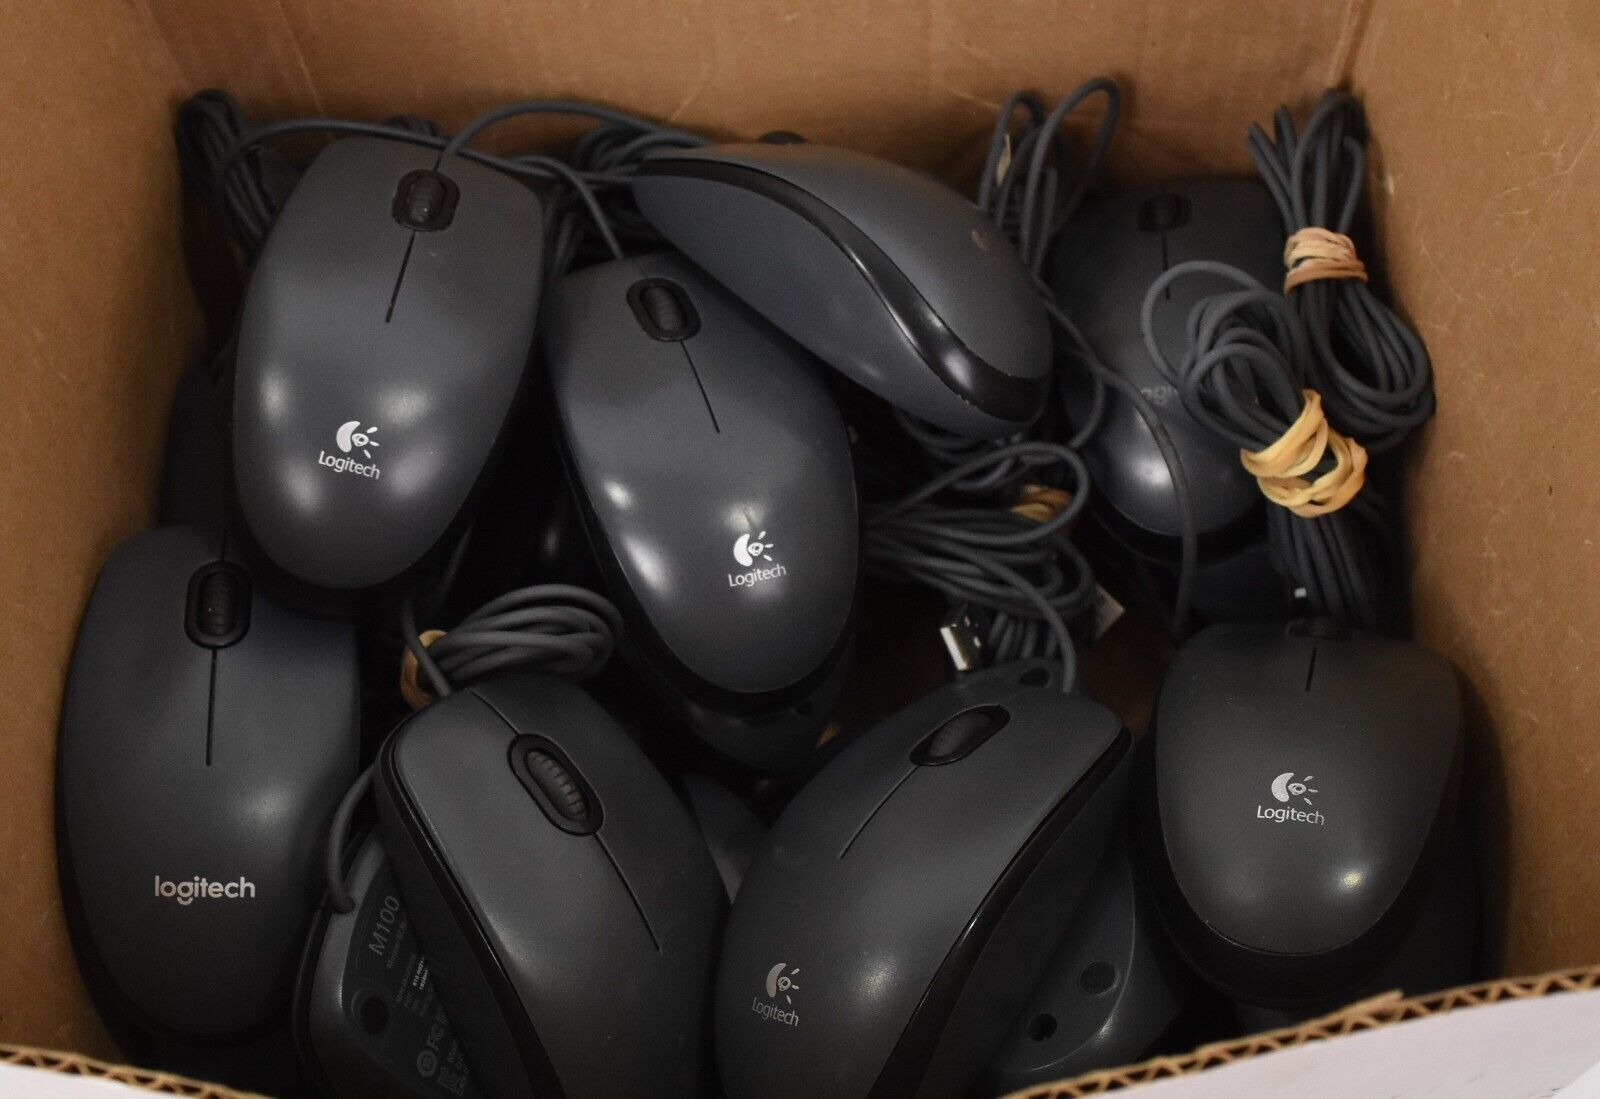 Lot of (20) Logitech M100 Gray Wired USB Mouse